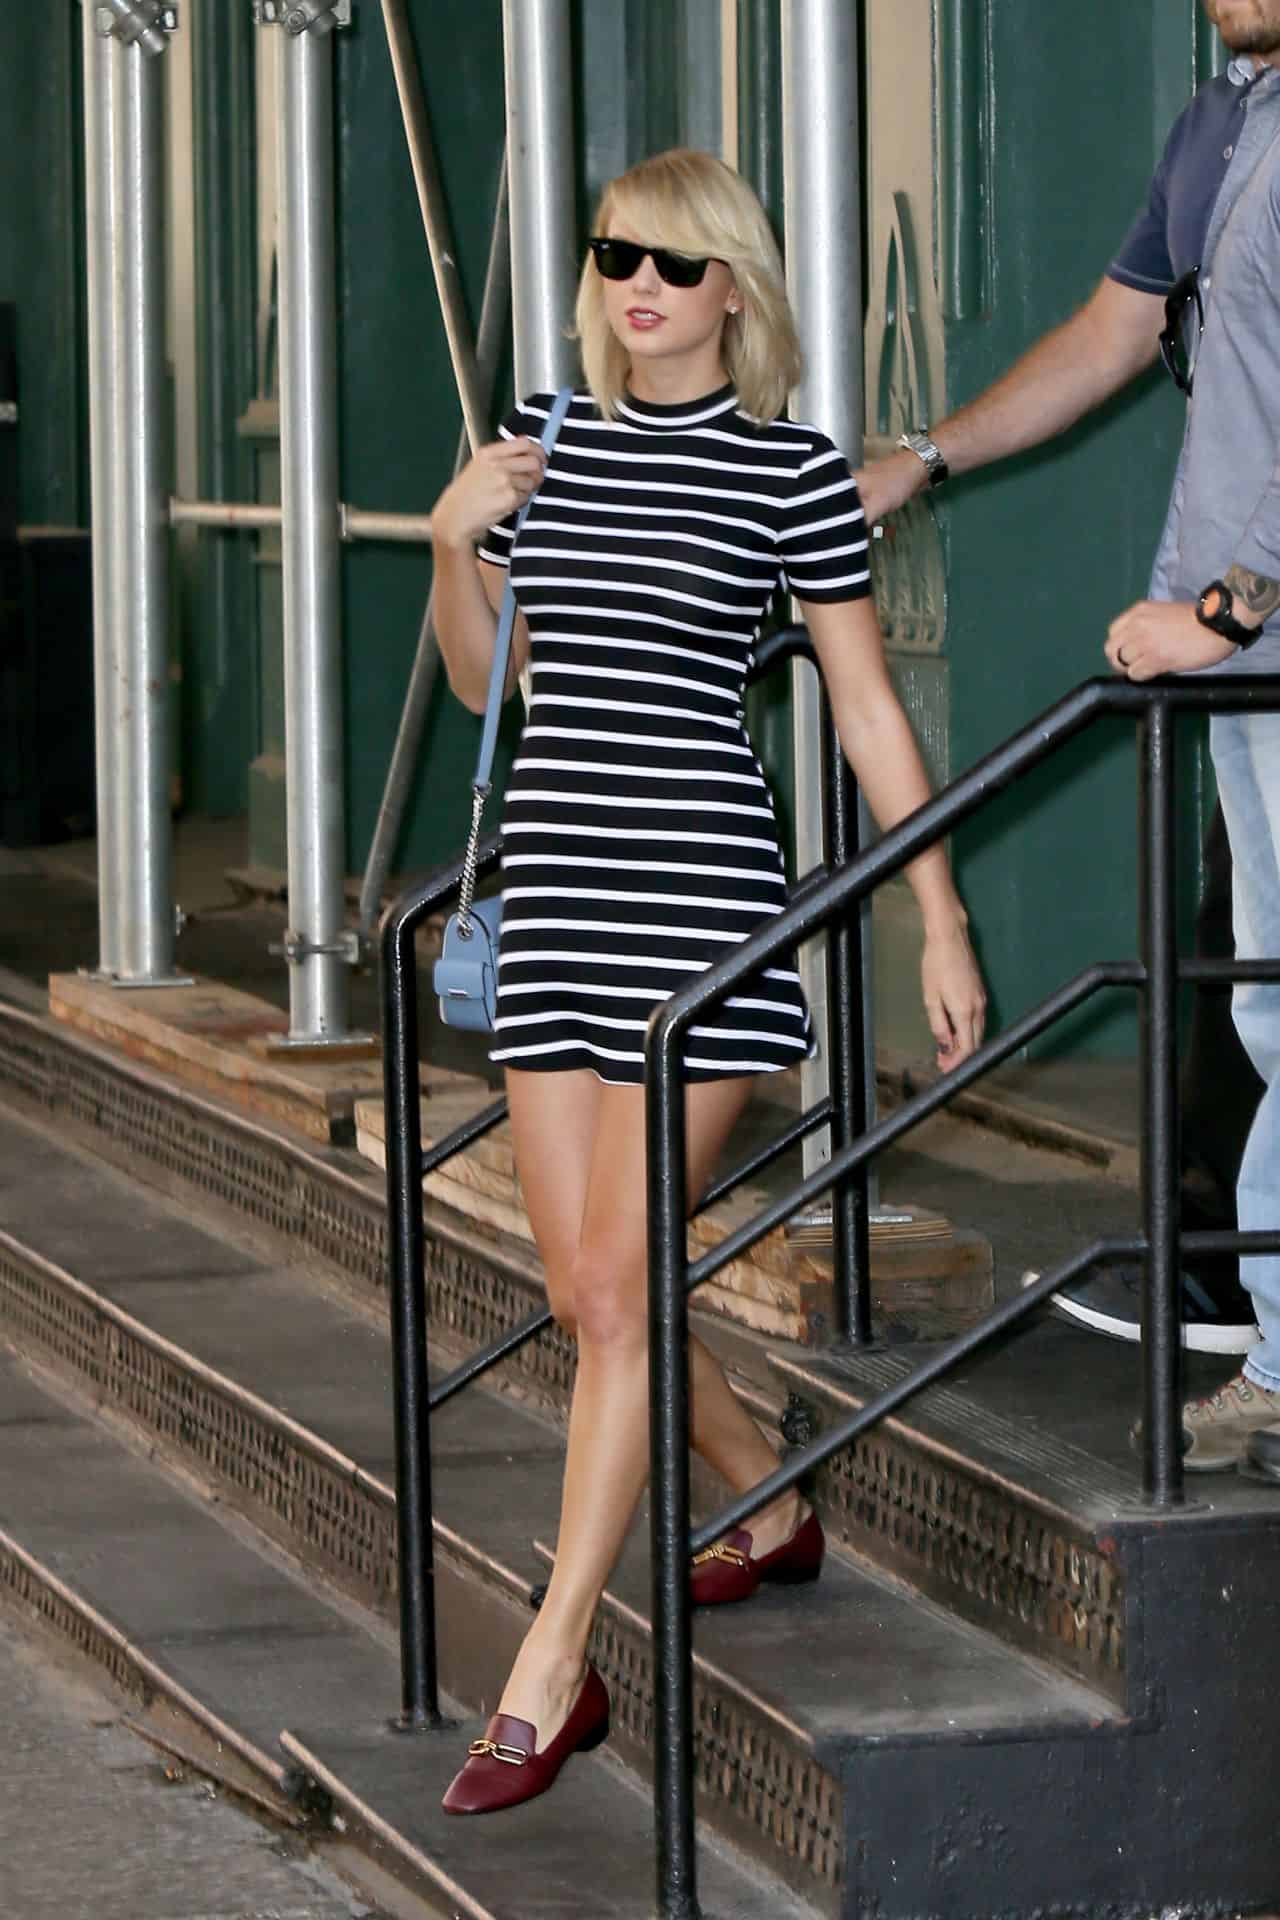 Taylor Swift Steps Out in NYC in Sleek Black and White Striped Dress